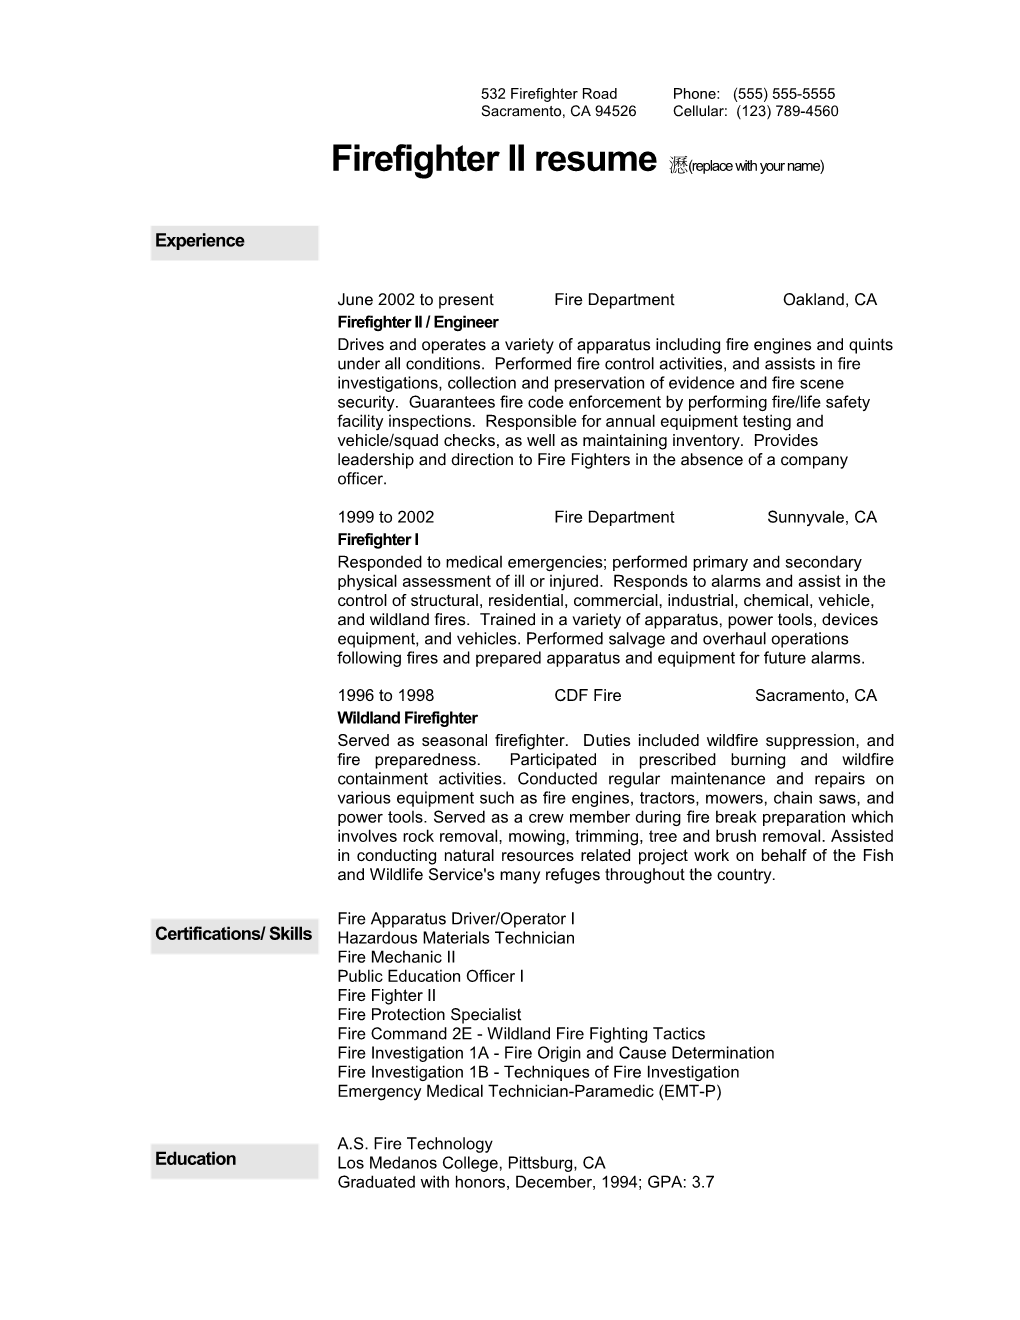 Firefighter II Resume ! (Replace with Your Name)